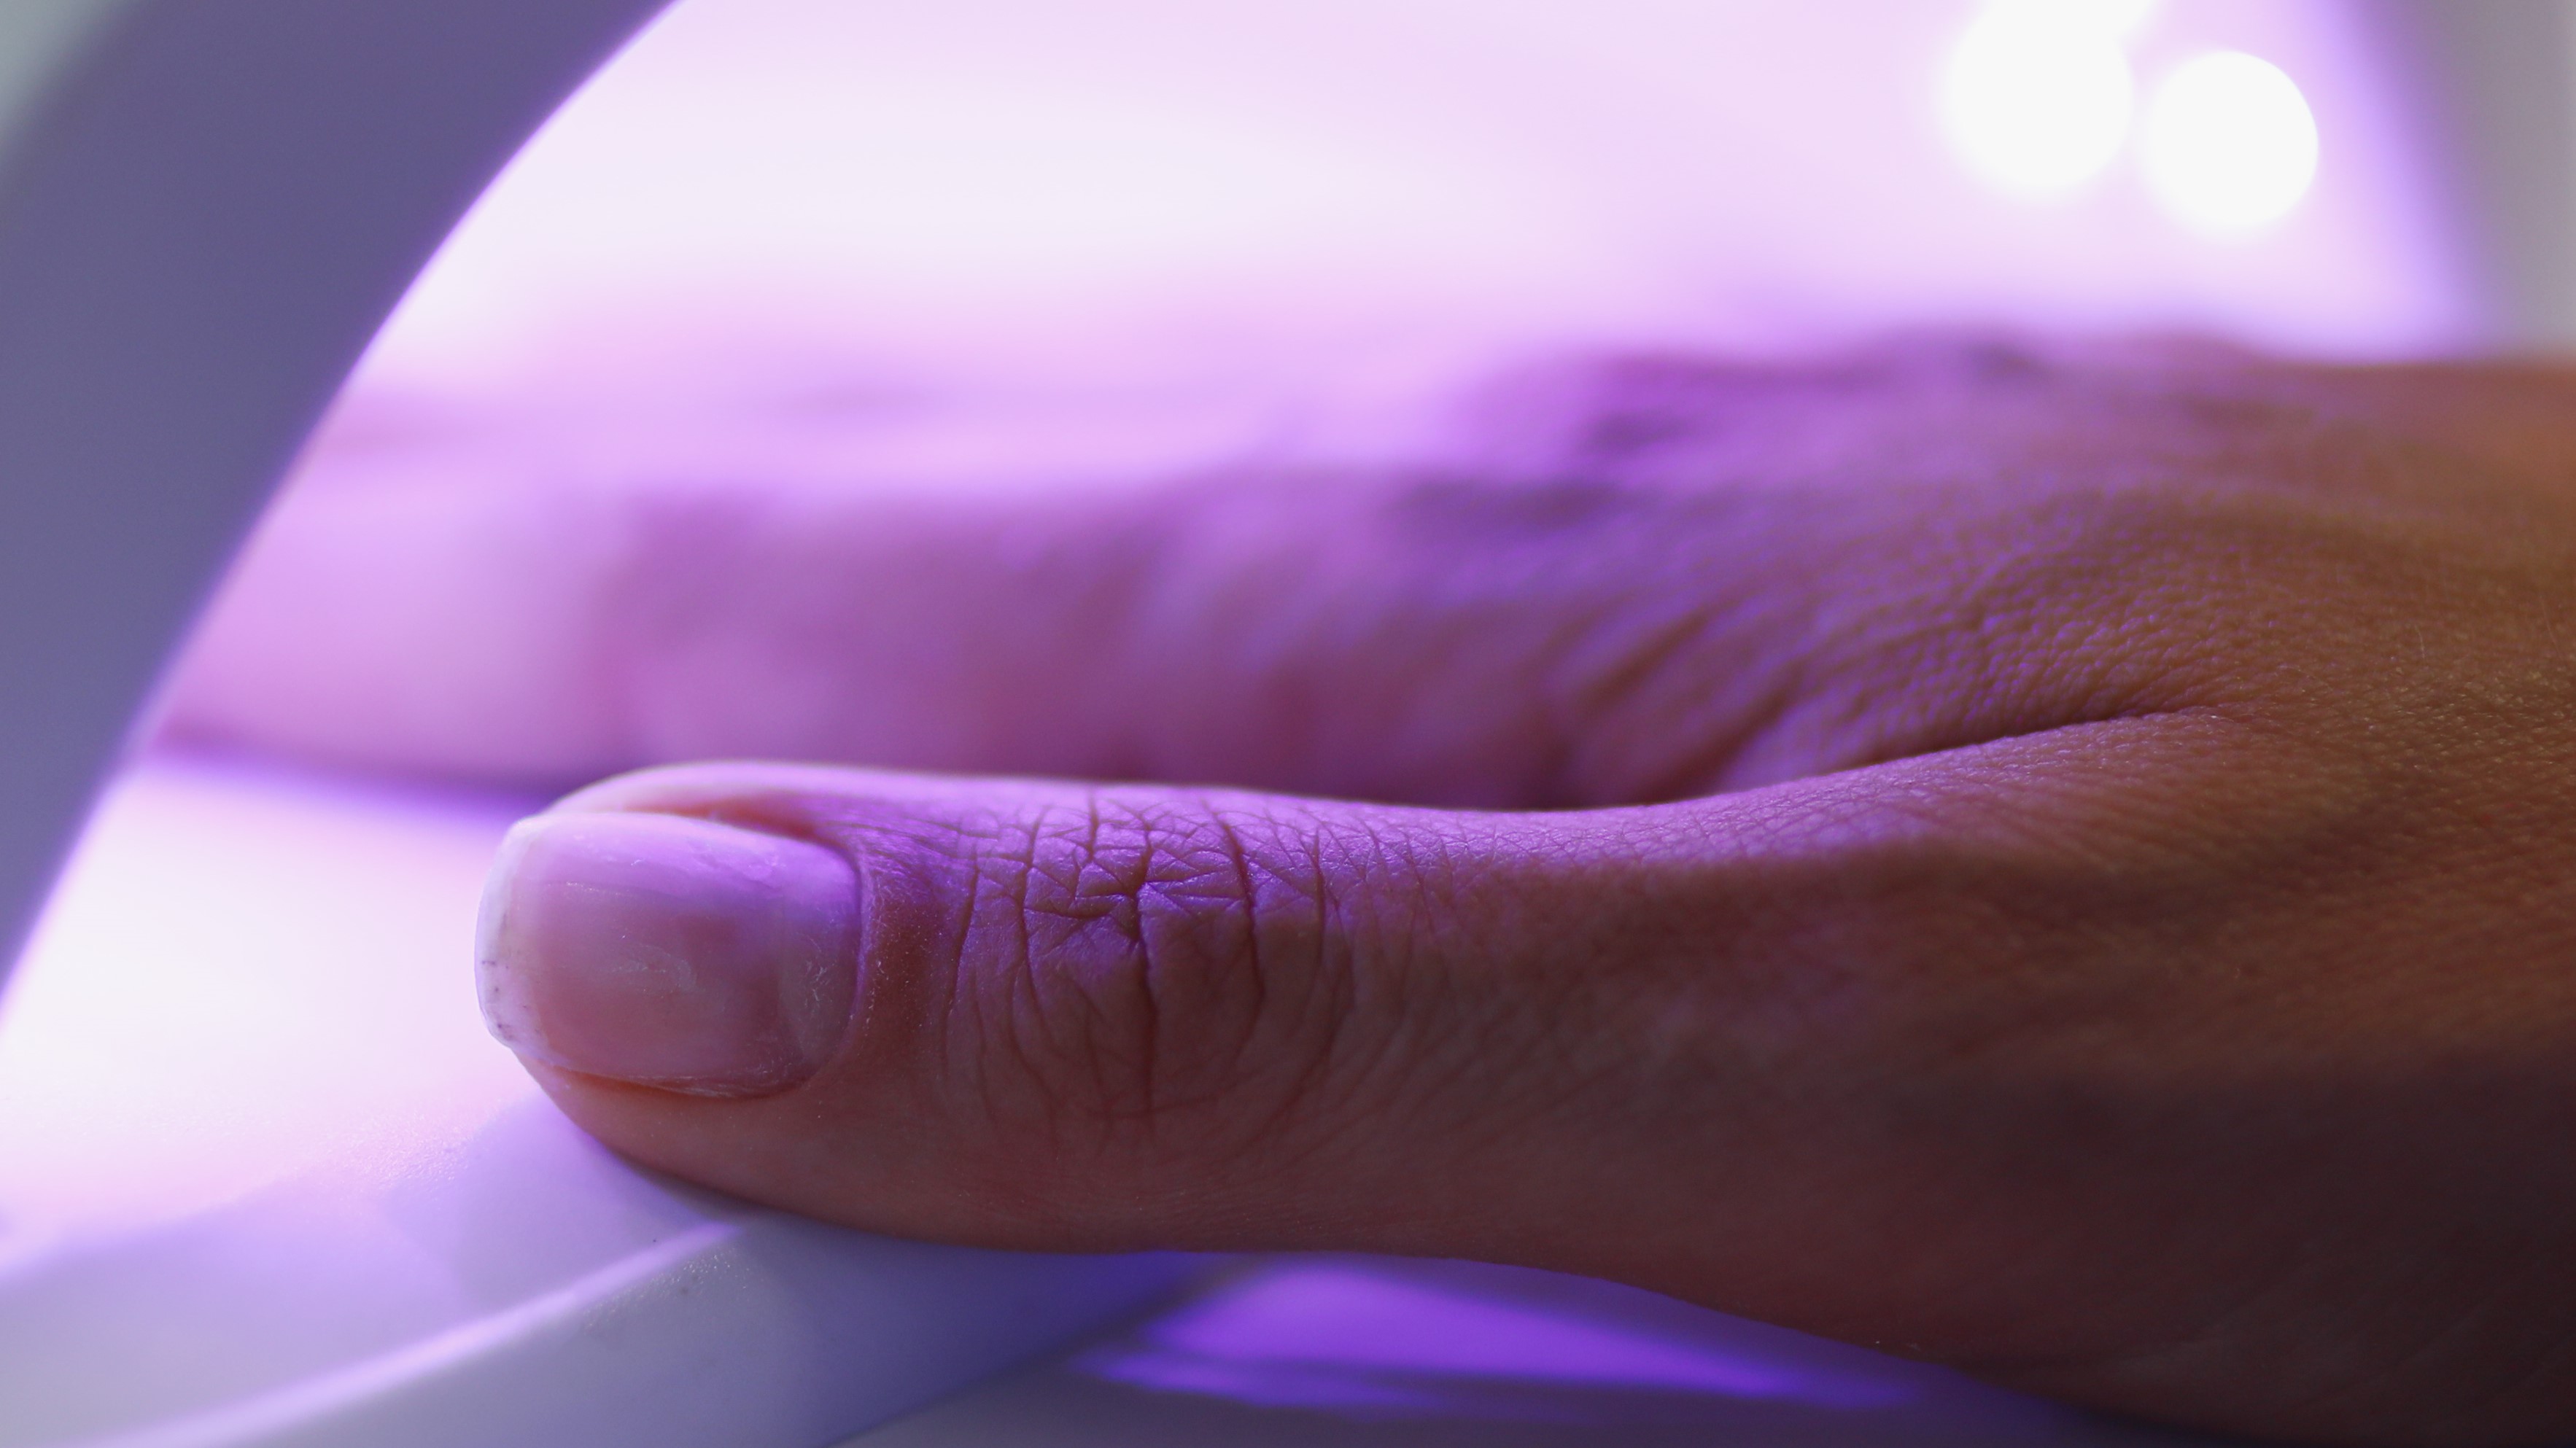 Is It Safe To Use a UV Light For Your Nails? - ManiGlovz